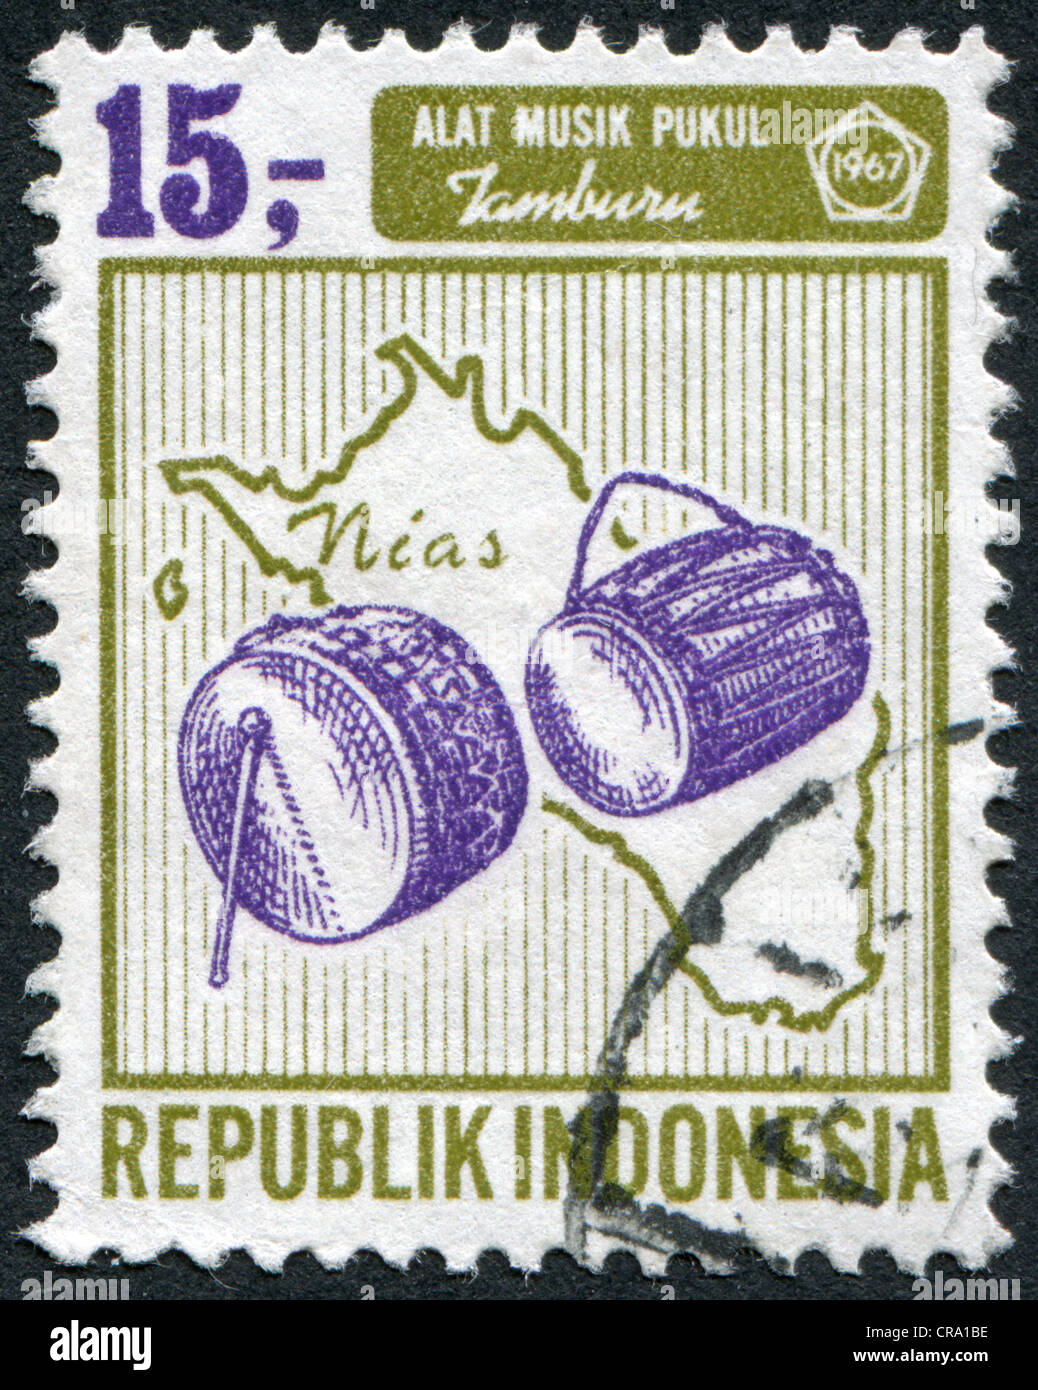 INDONESIA - CIRCA 1967: A stamp printed in the Indonesia, shows a musical instrument drum on a map of Nias, circa 1967 Stock Photo